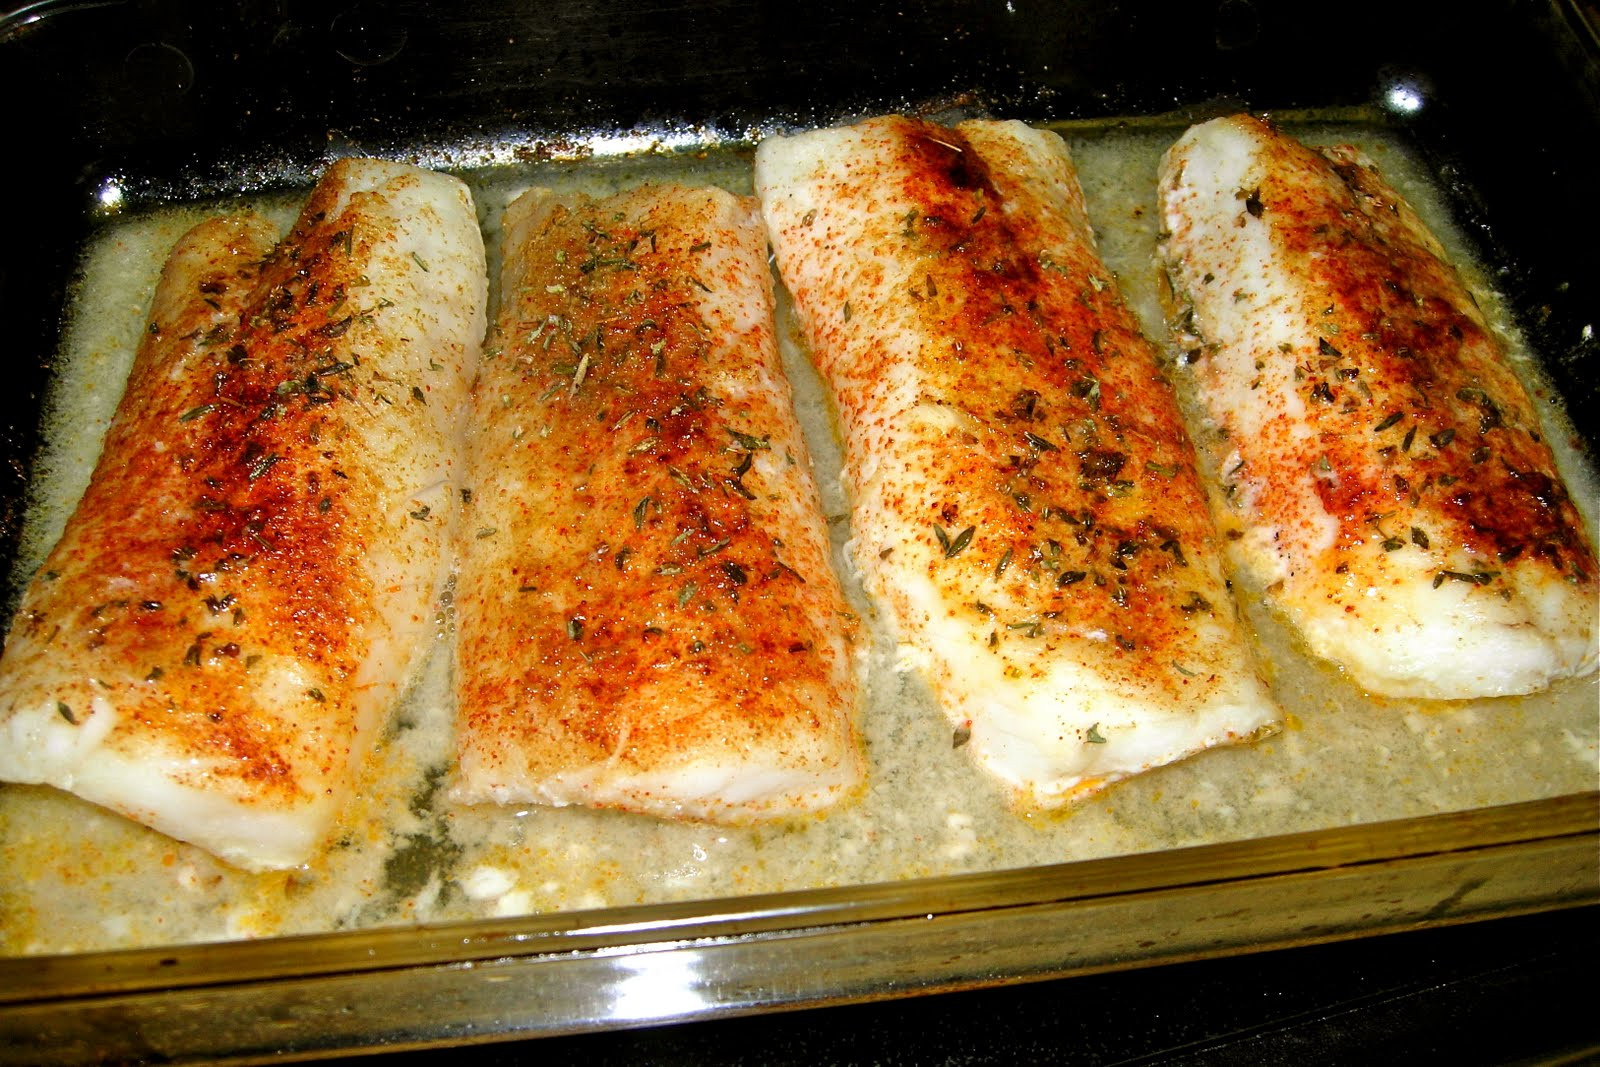 Recipes For Cod Fish
 CFSCC presents EAT THIS Simple Baked Cod